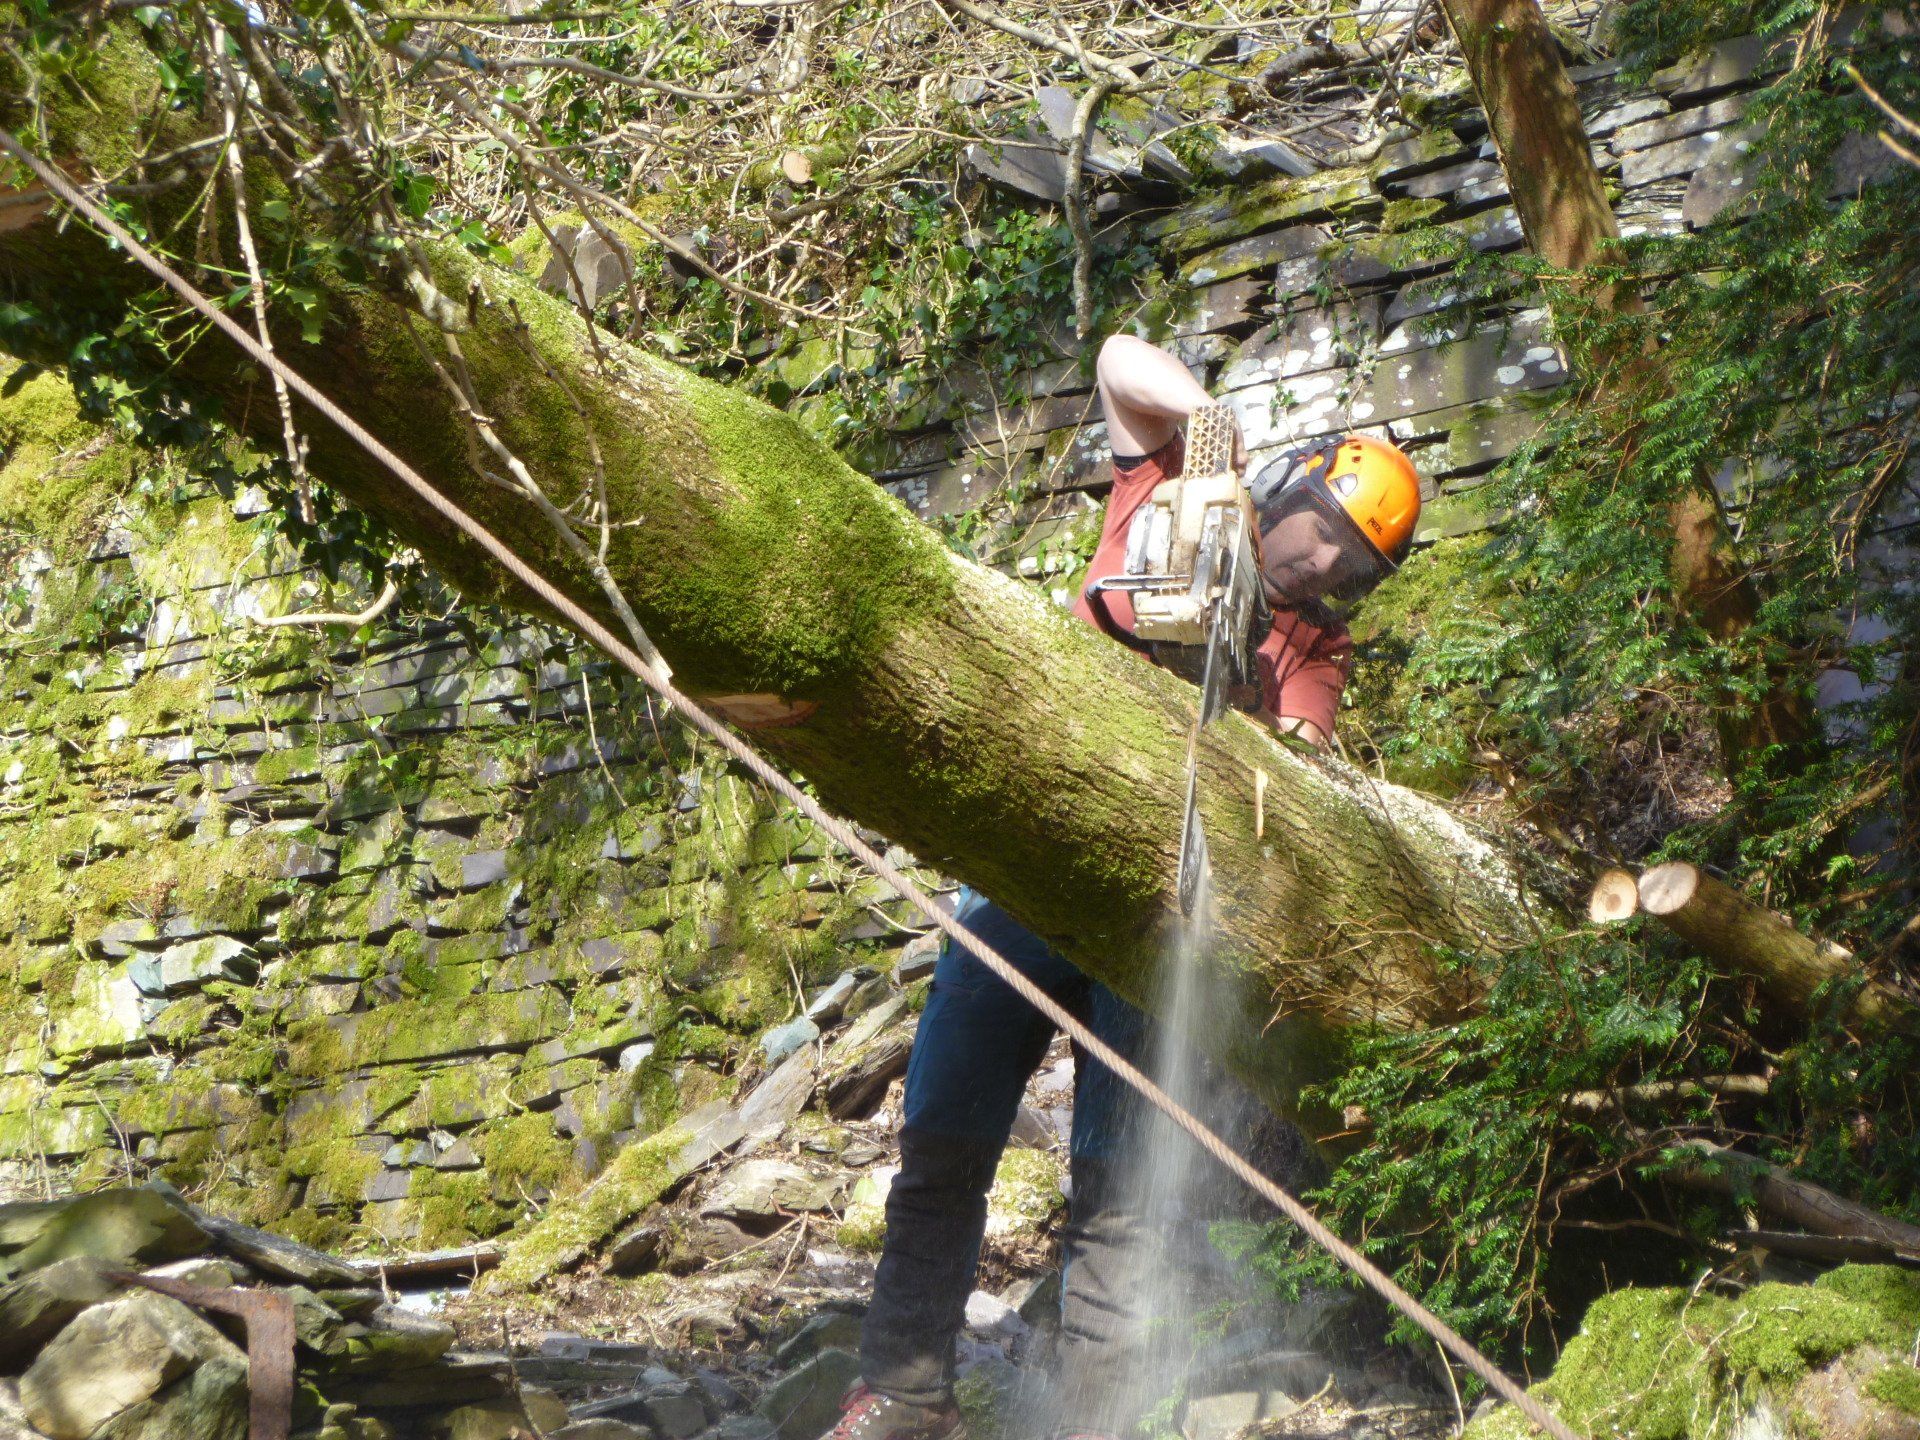 Using the winch to pull over the tree trunk.